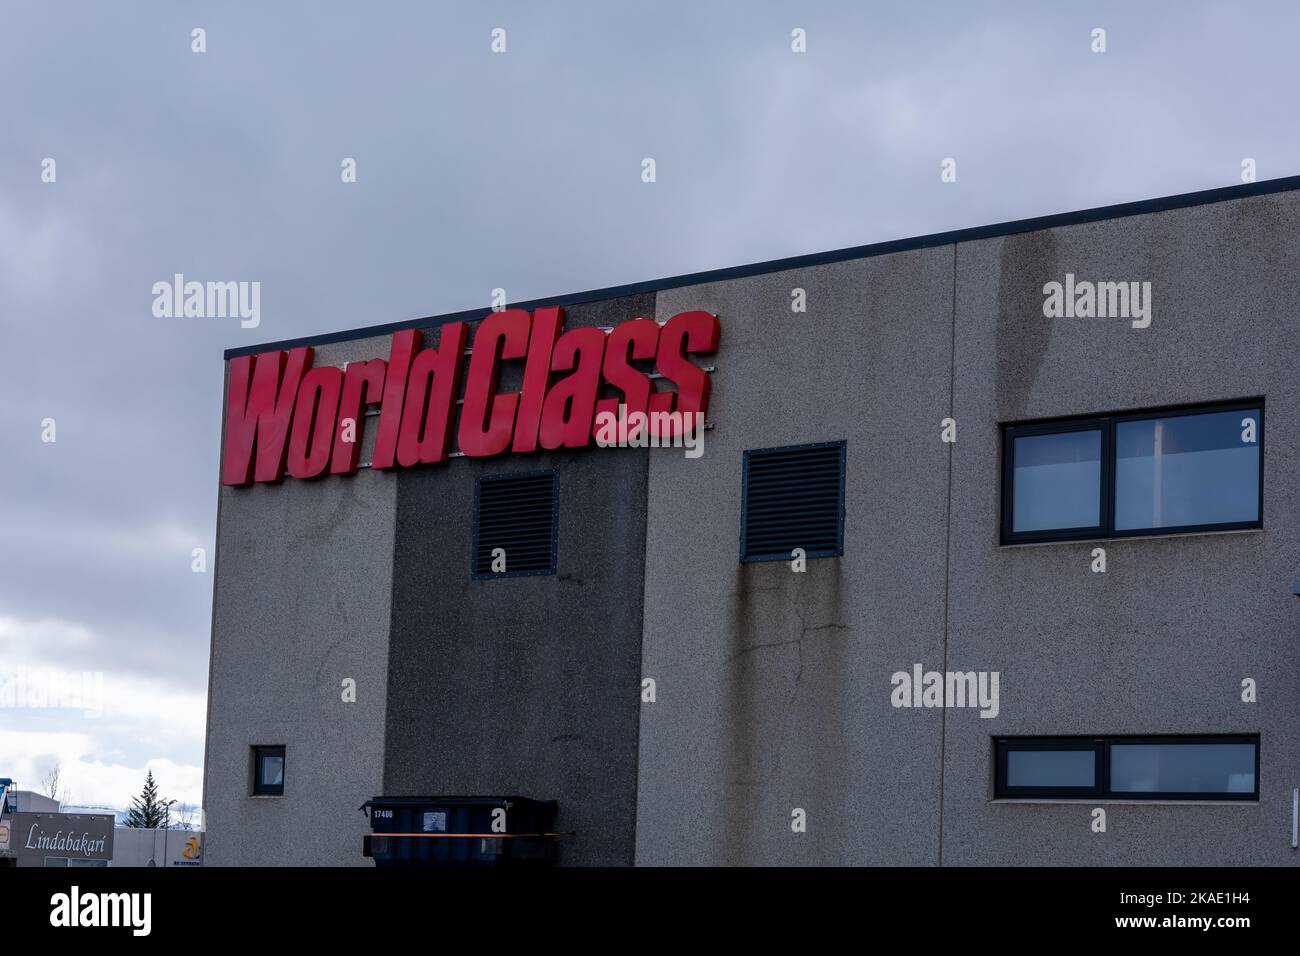 Reykjavik, Iceland - March 26, 2022: World Class fitness center. Red logo on a building. Stock Photo